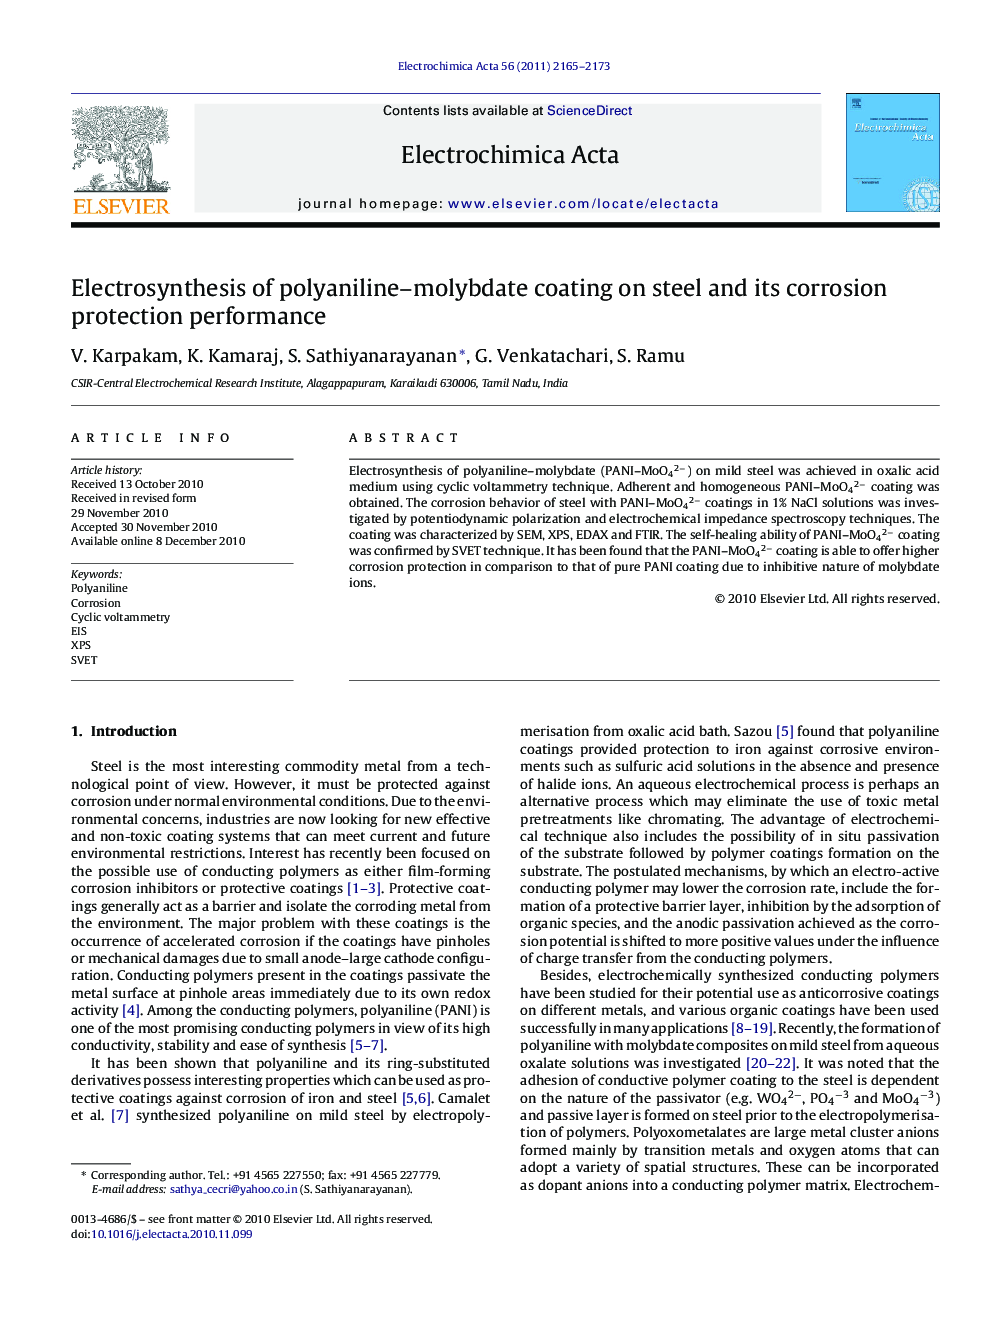 Electrosynthesis of polyaniline-molybdate coating on steel and its corrosion protection performance